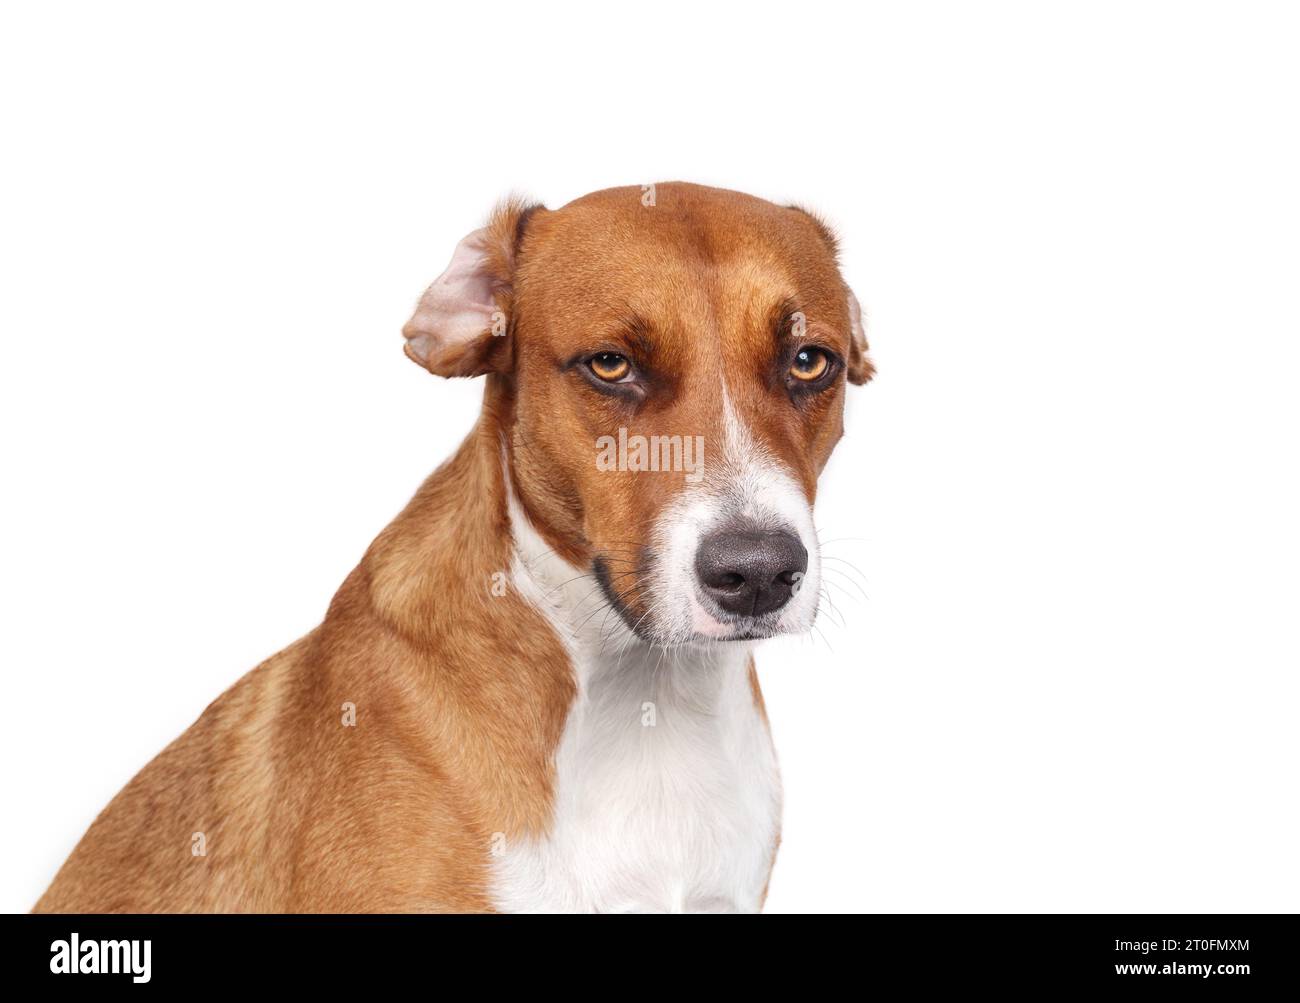 Serious dog with ears folded backwards due to lack of structure or running. Cute puppy dog looking at camera. Funny ear position. Female Harrier mix, Stock Photo